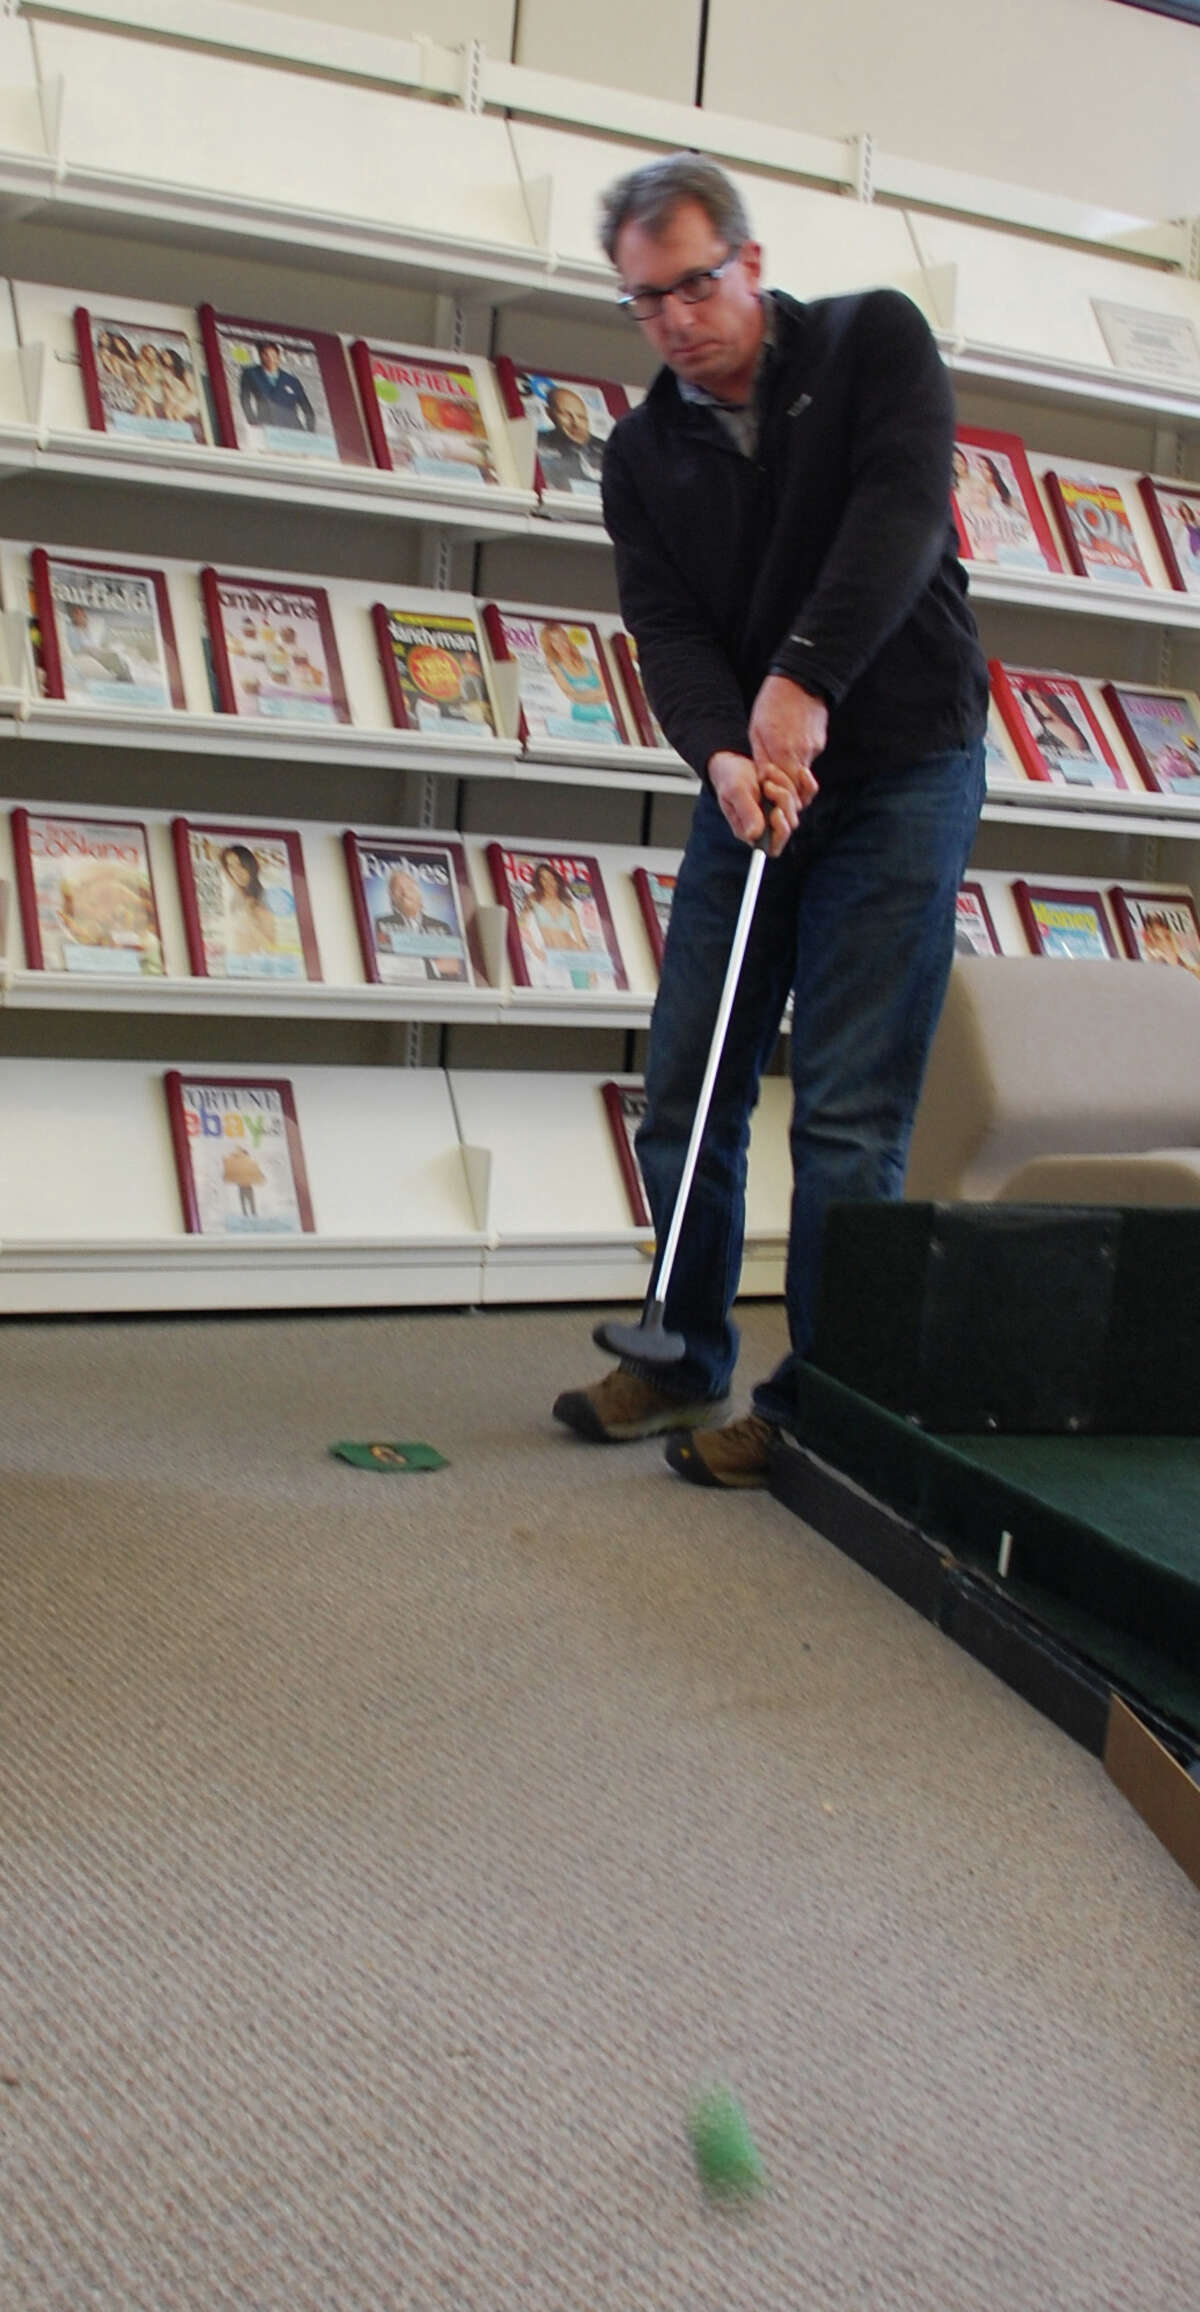 Neal Fink of Fairfield unleashes a putt on a "green" set up Sunday for a mini golf fundraiser at Fairfield Woods Branch Libray. FAIRFIELD CITIZEN, CT 3/3/13